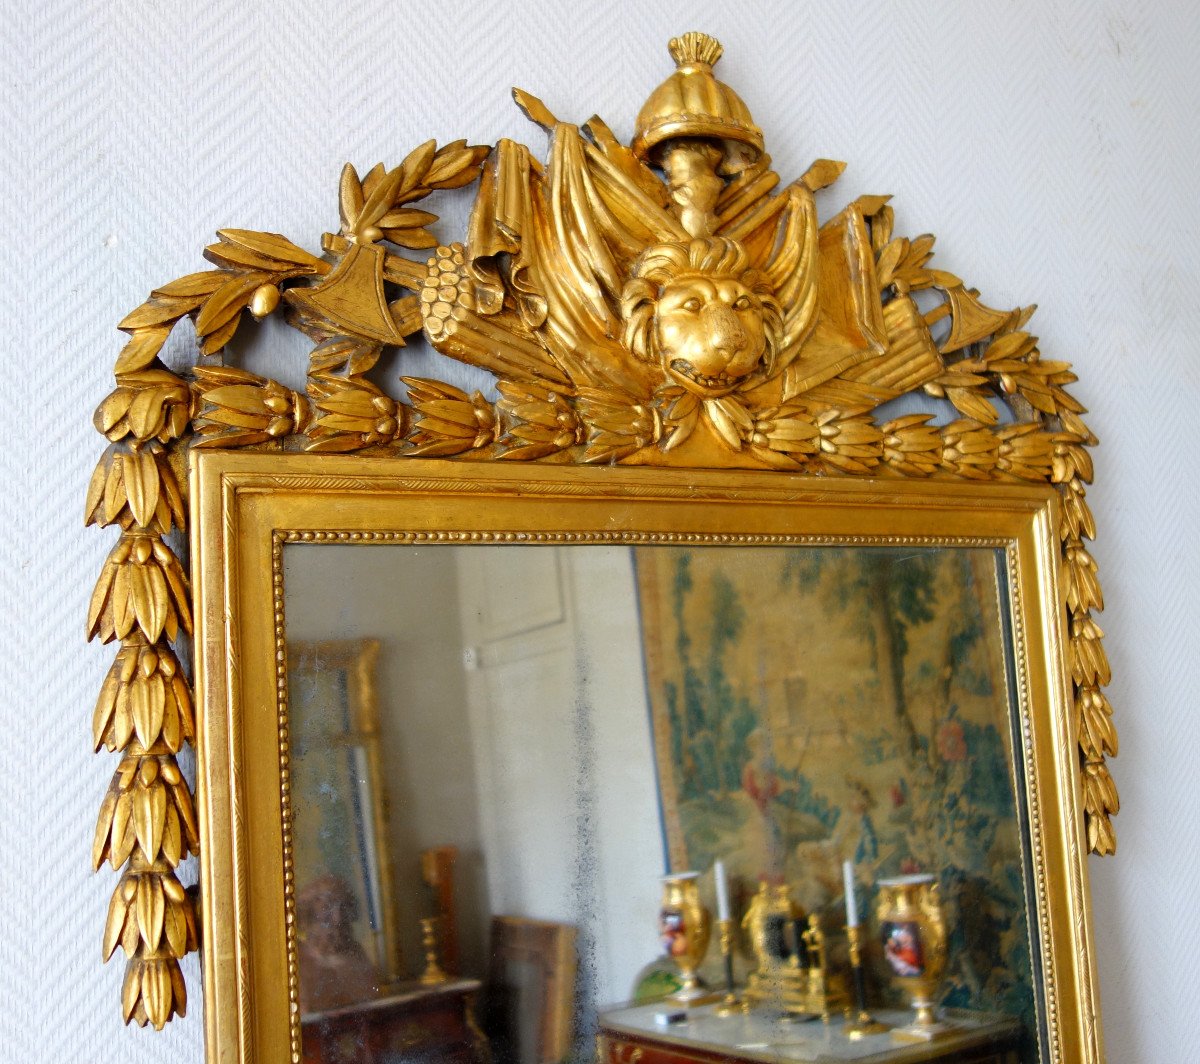 Tall Louis XVI Mirror, Attributes Of Hercules Trophy, Gold Leaf Gilt Wood - Late 18th Century -photo-4